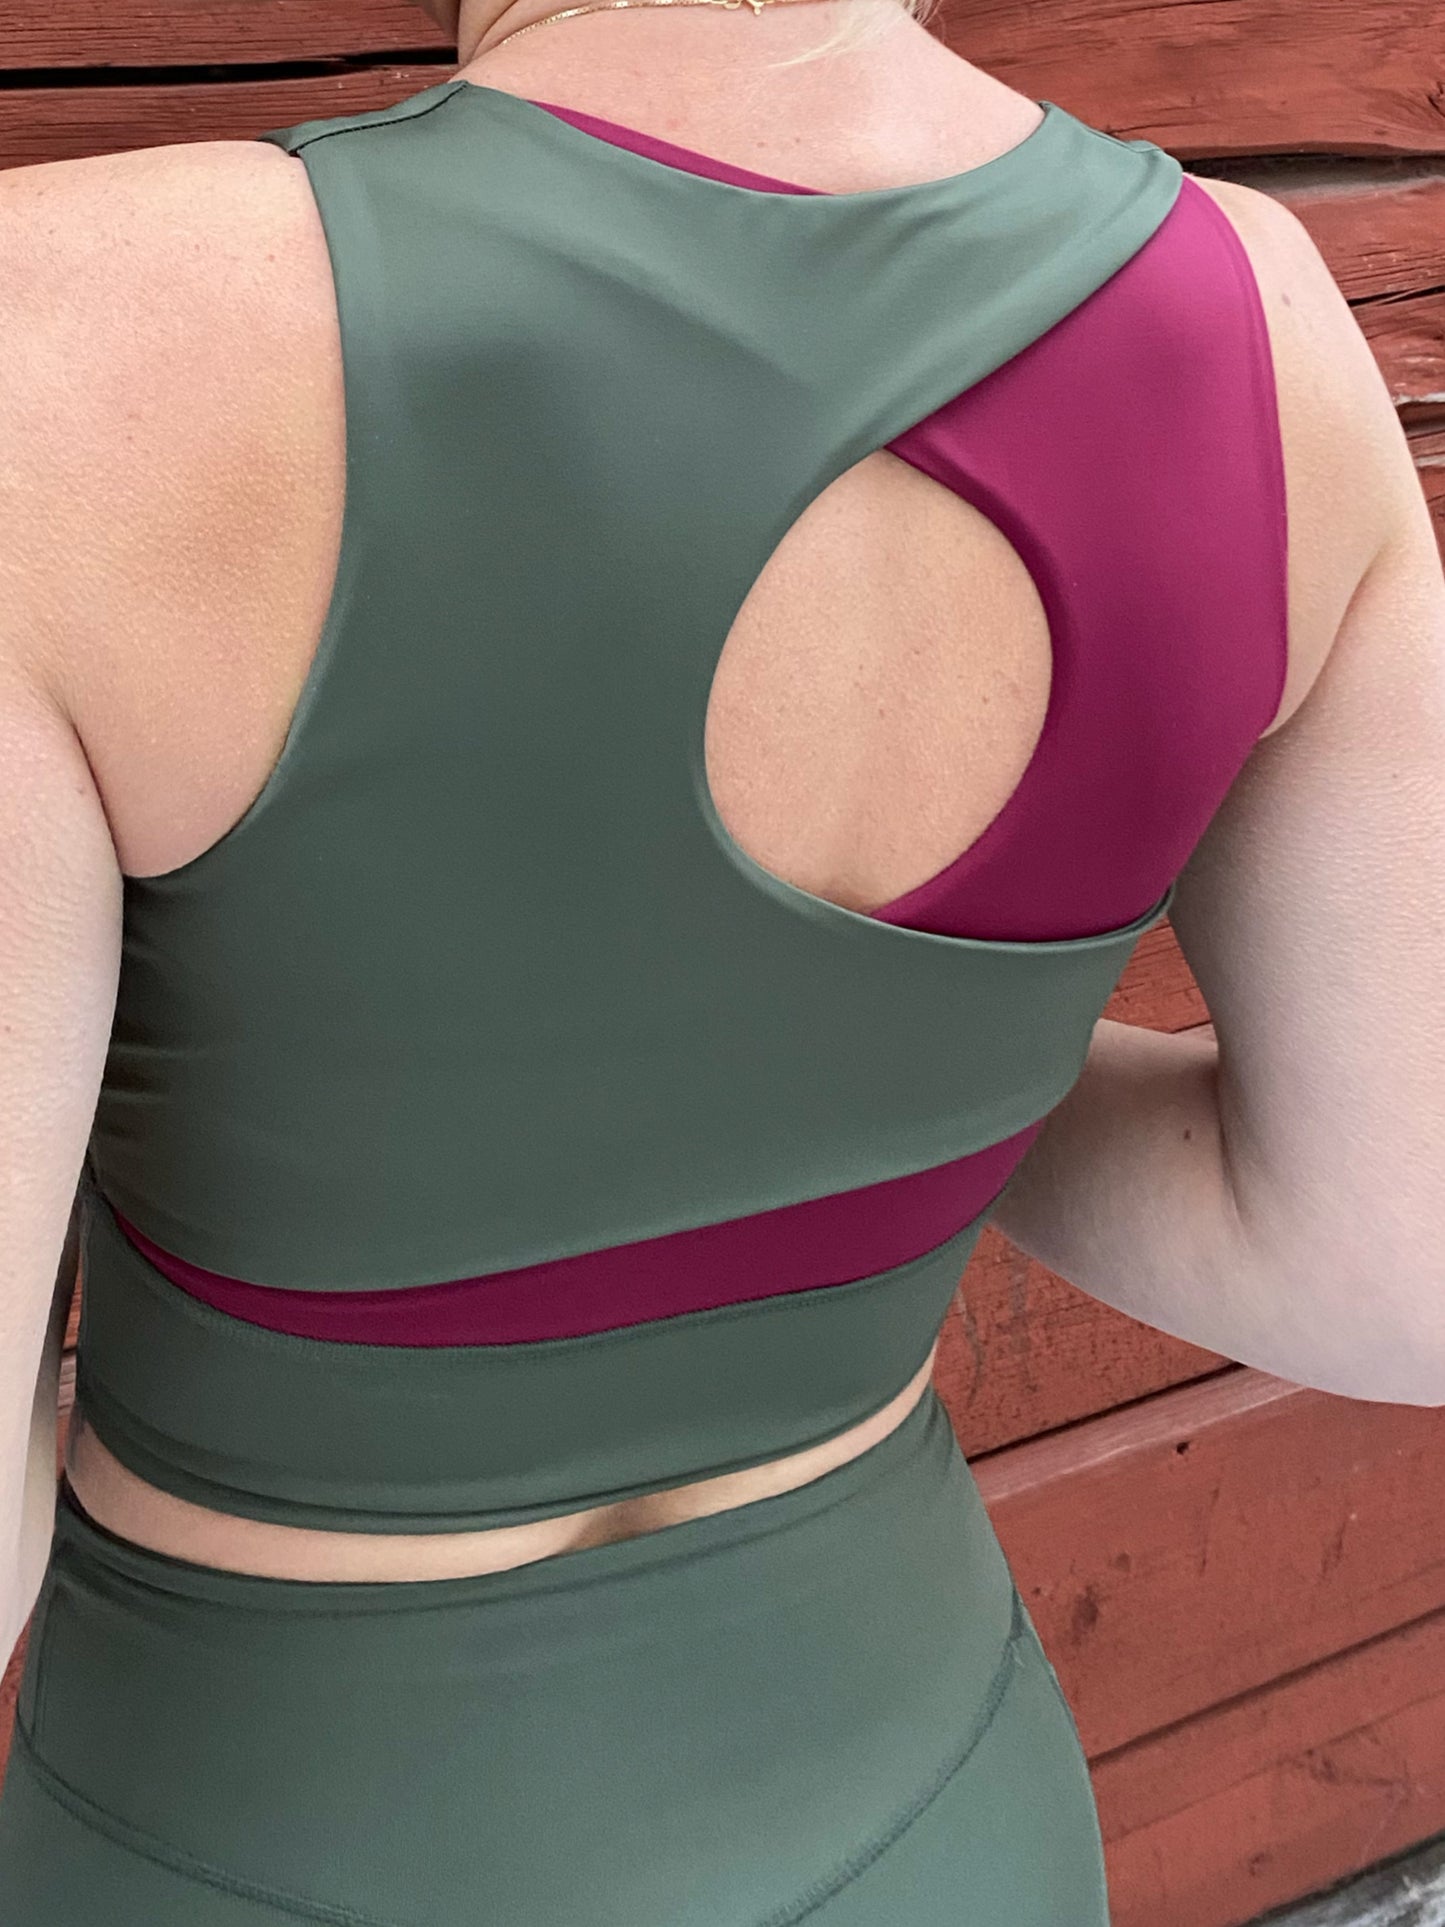 Frosty Friday - Sports Top - Olive Green/Coral Pink